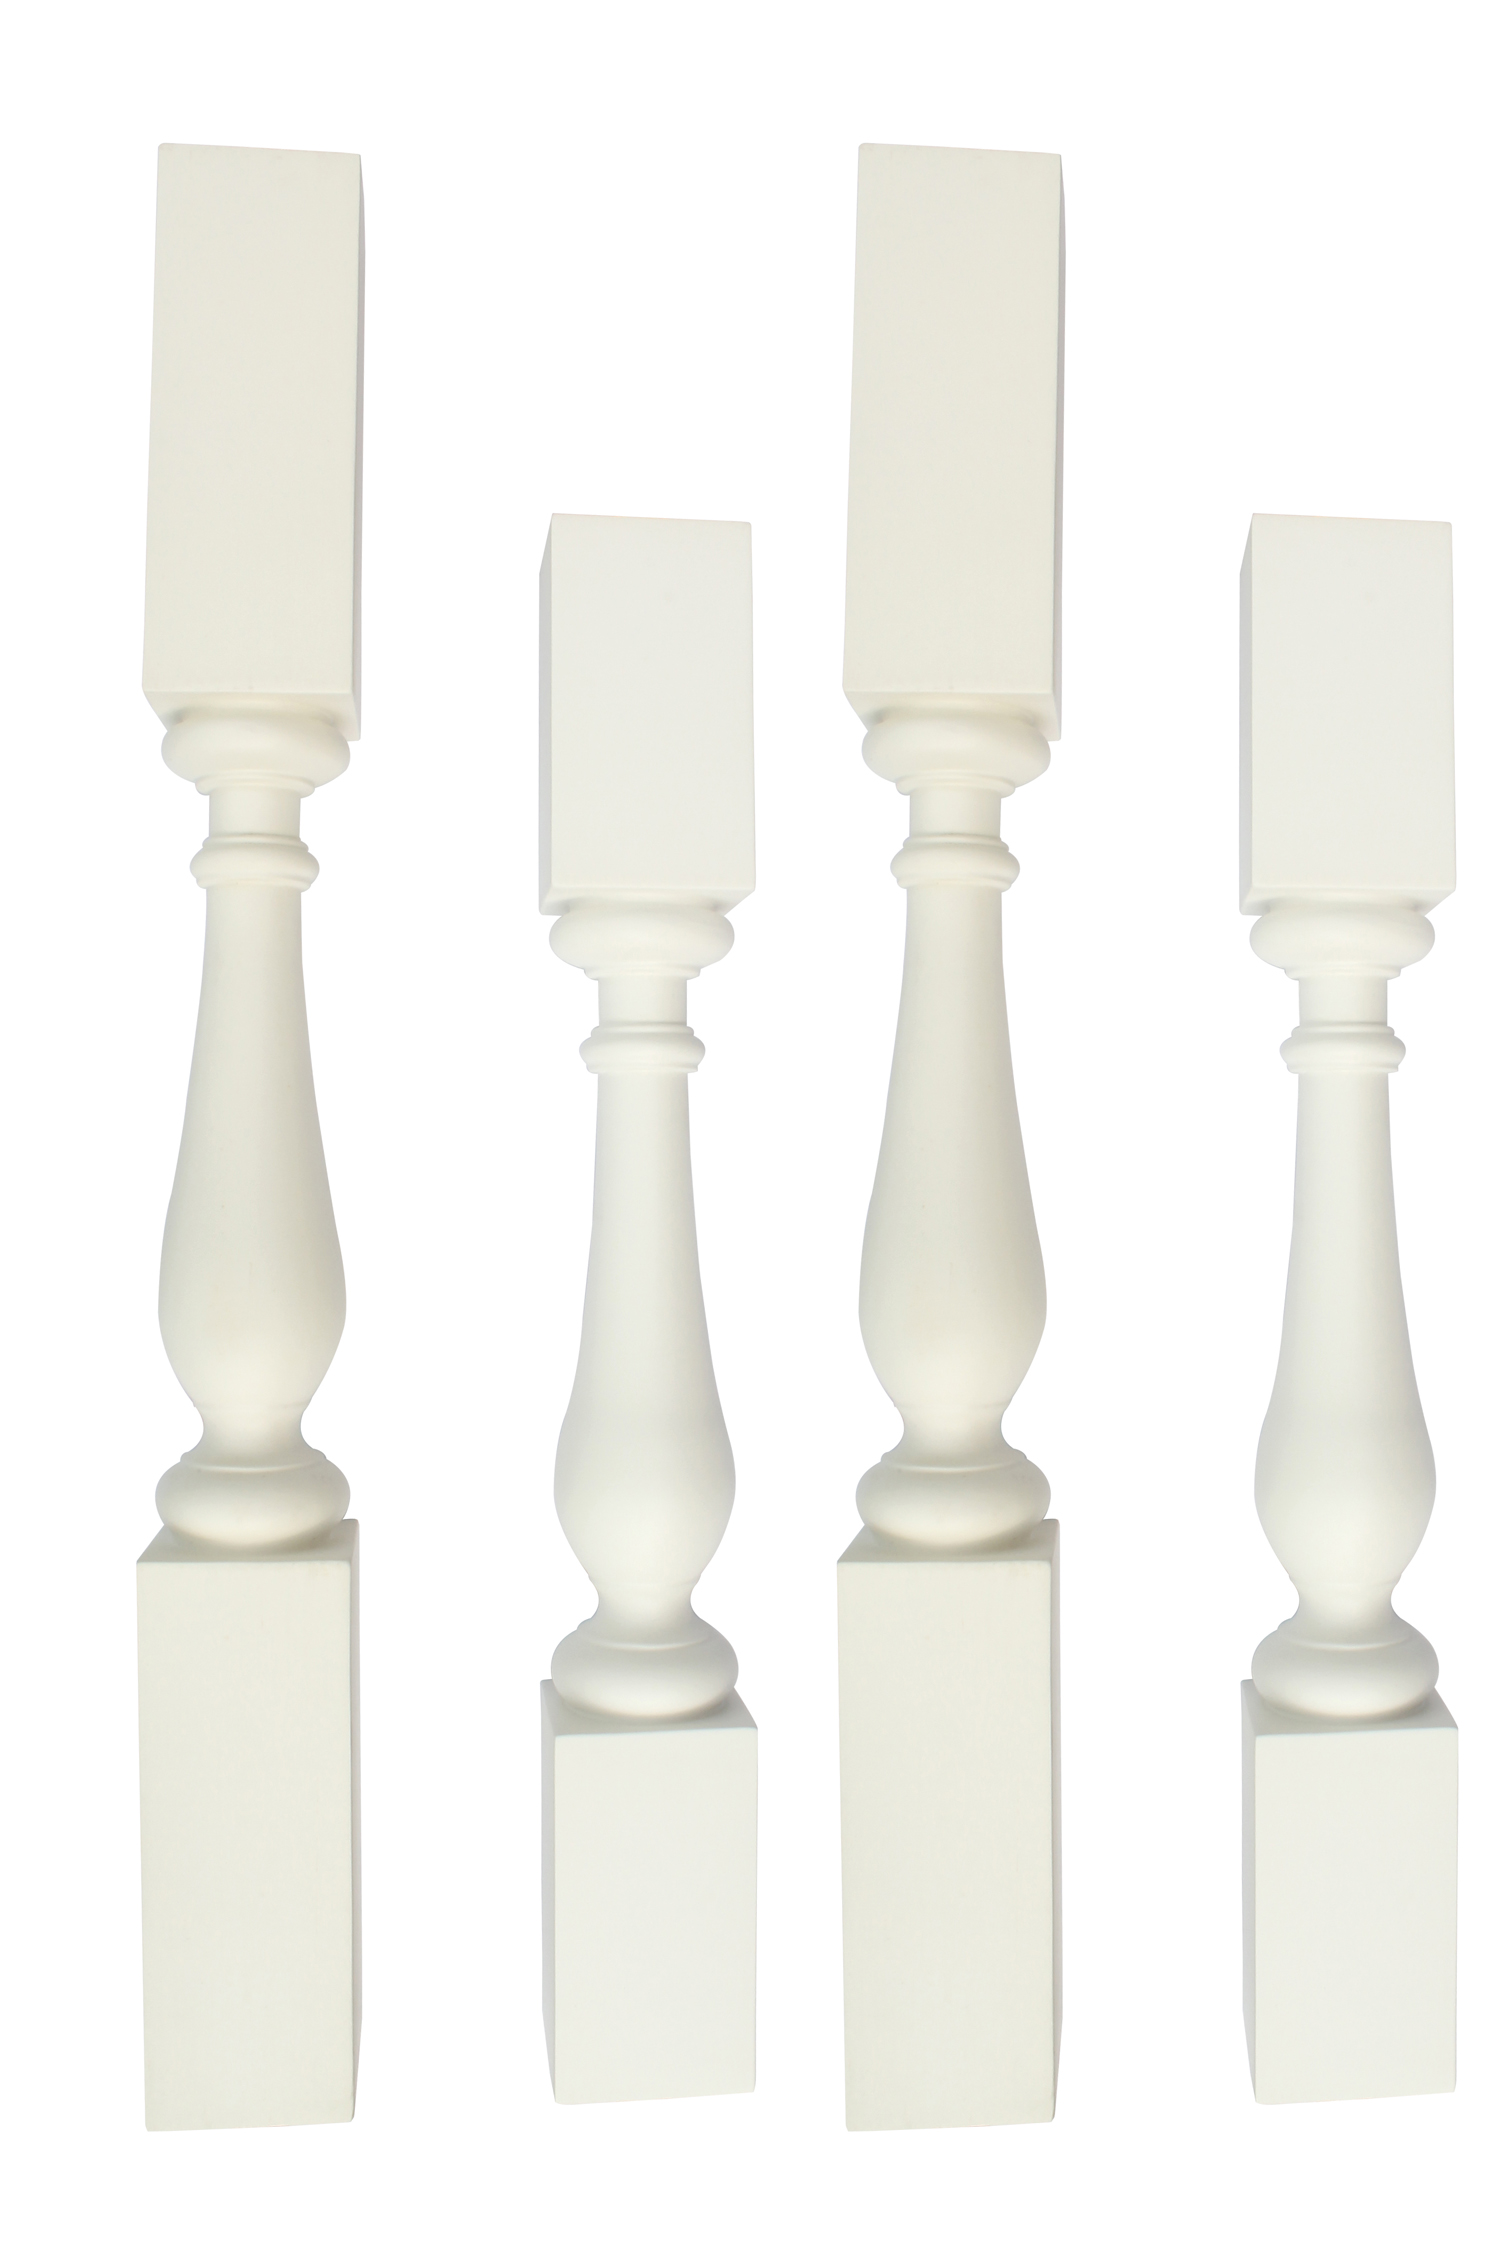 creative baluster,balcony baluster manufacture,indoor baluster China supplier,antique baluster supplier